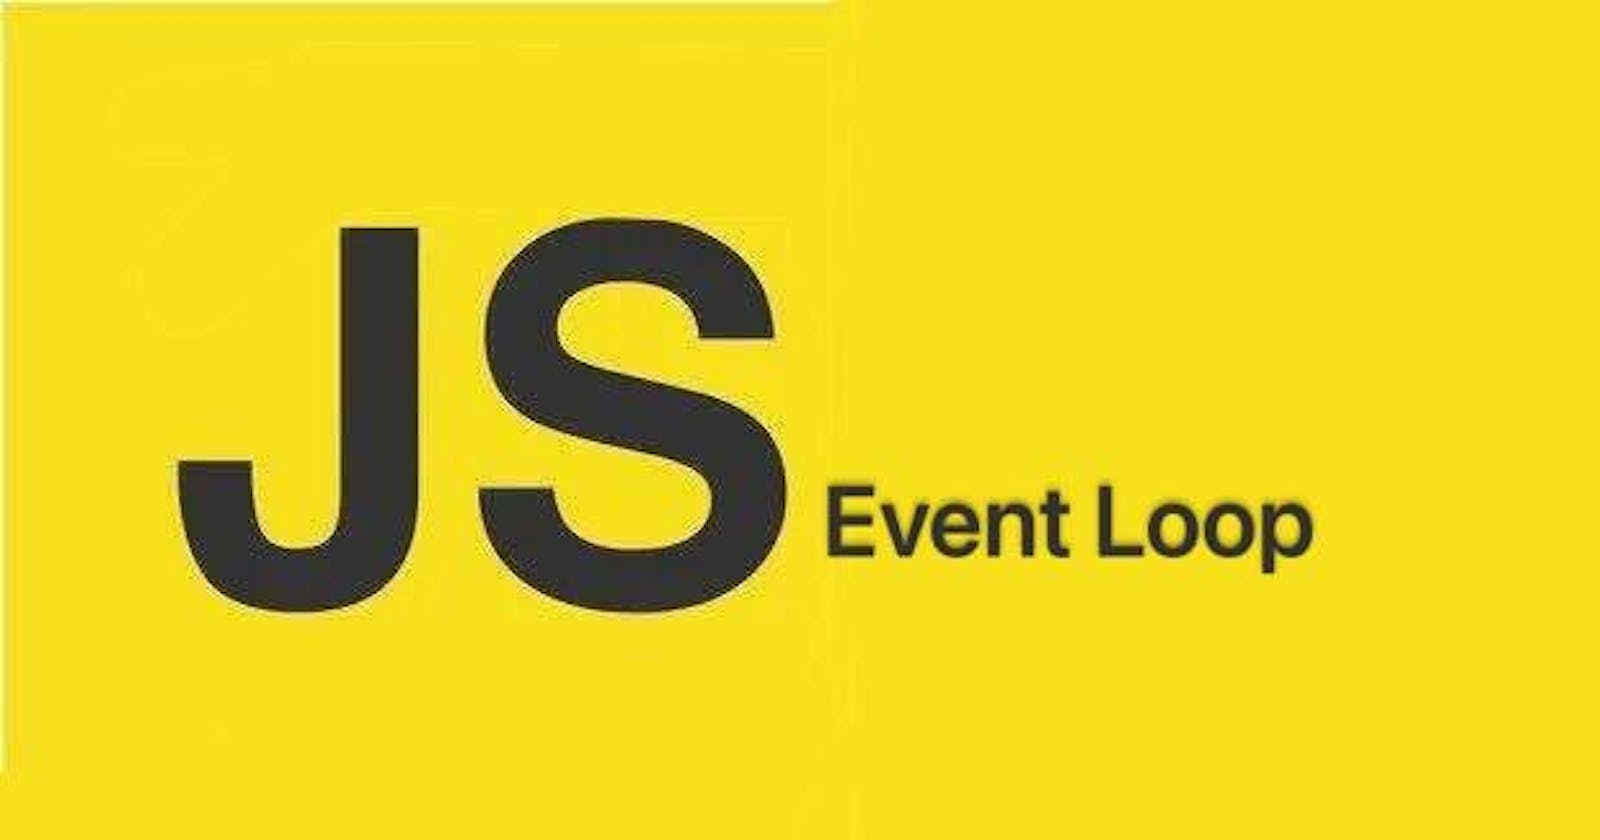 What is Event Loop?